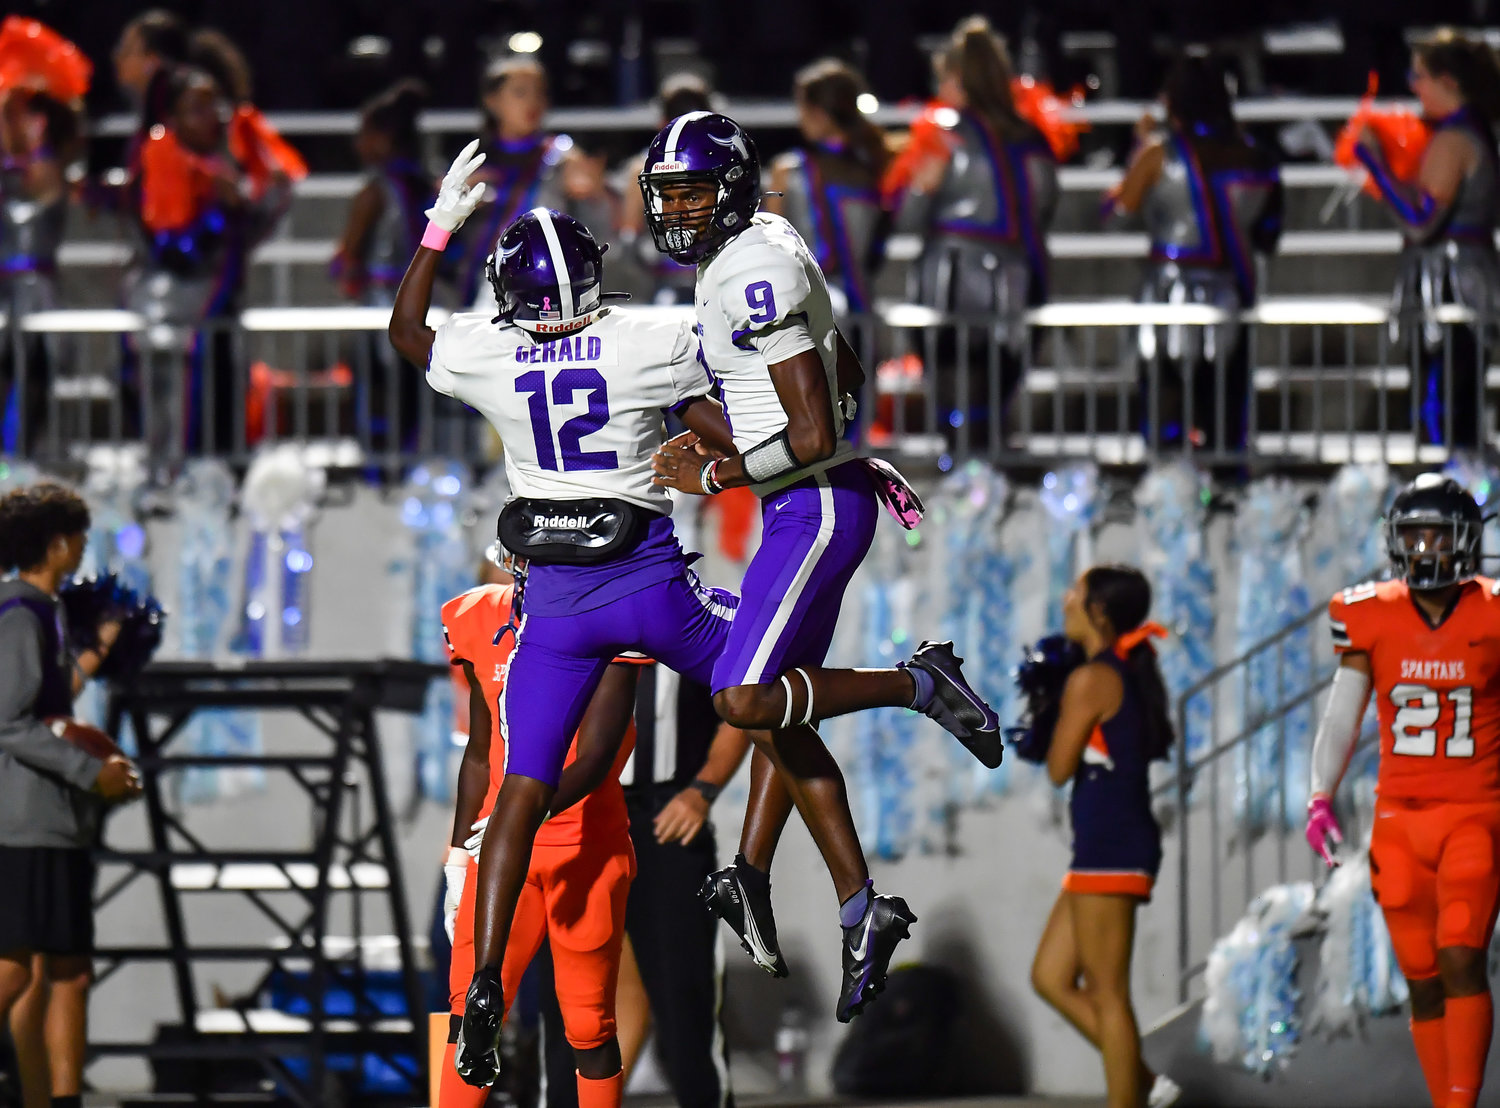 Katy, Tx. Oct. 8, 2021: Morton Ranchs Mike Gerald #12 celebrate a TD with QB Joshua Johnson #9 during a District 19-6A game between Seven Lakes and Morton Ranch at Legacy Stadium in Katy. (Photo by Mark Goodman / Katy Times)